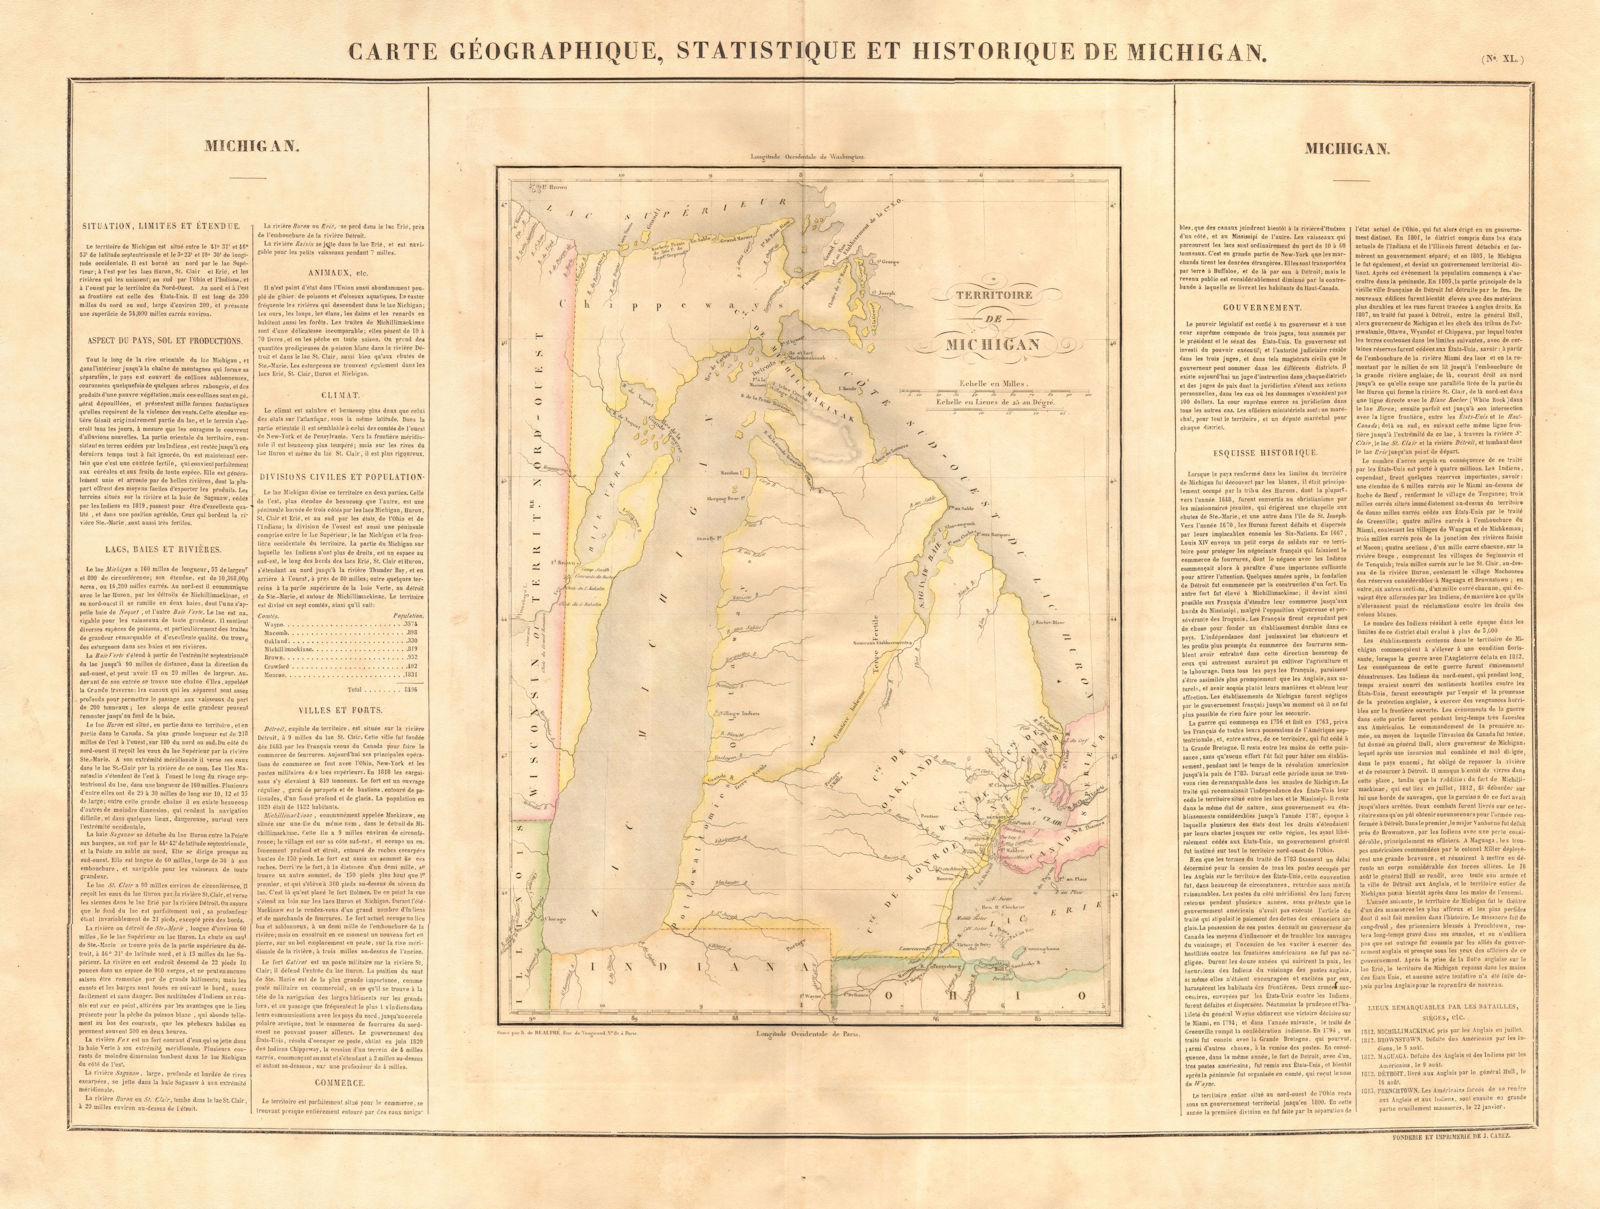 Michigan Territory. Antique map prior to statehood. Indian frontier. BUCHON 1825